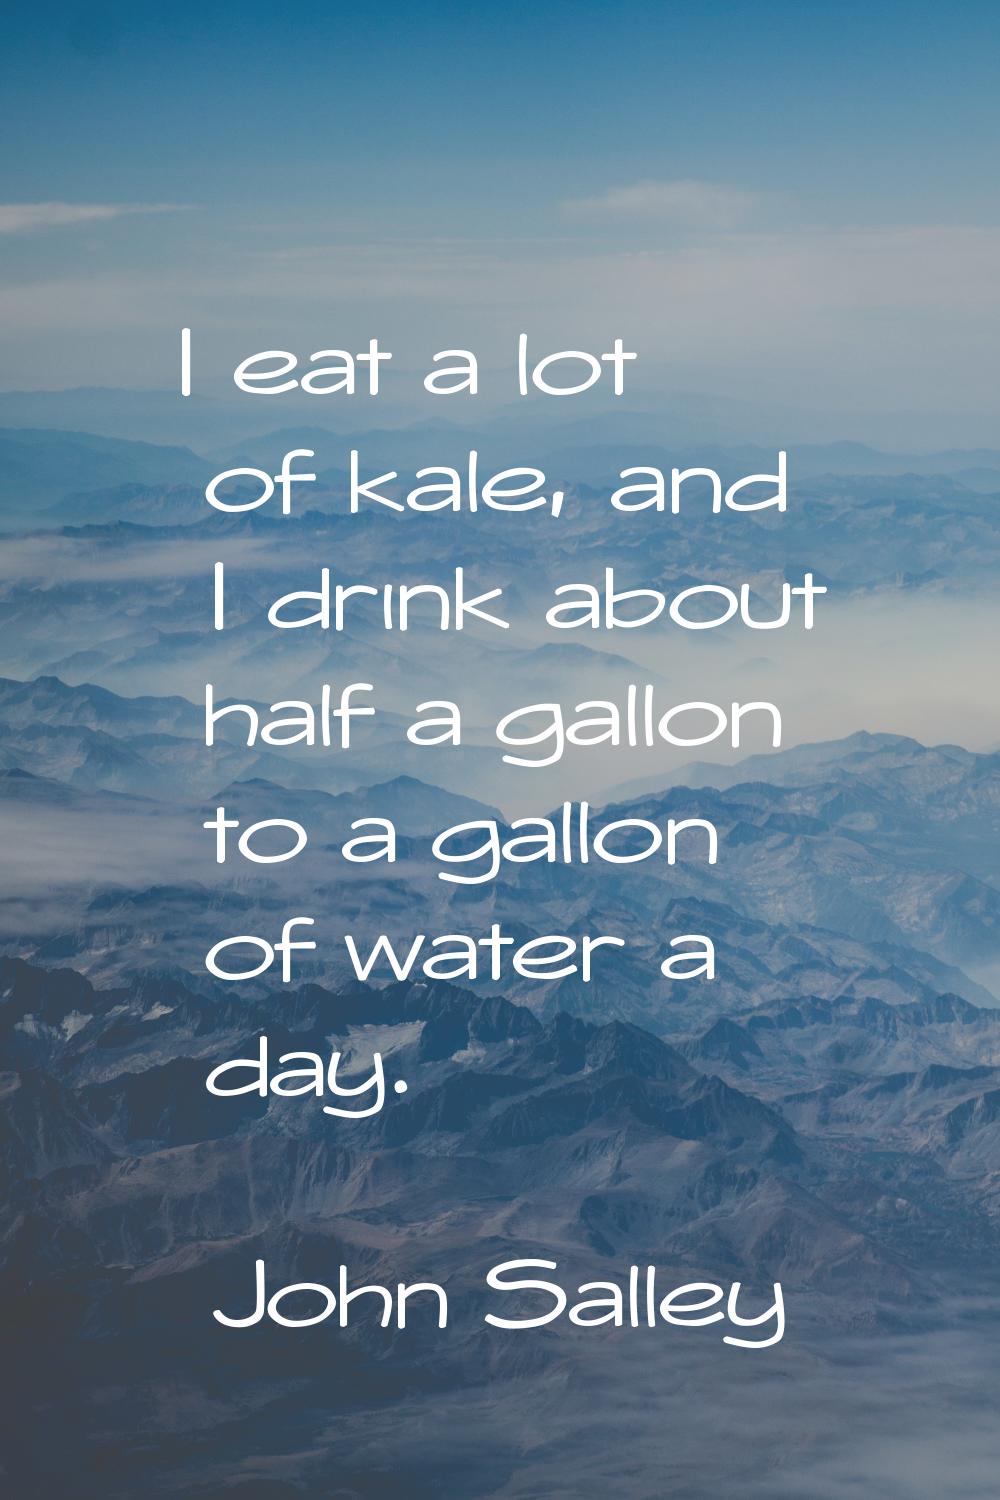 I eat a lot of kale, and I drink about half a gallon to a gallon of water a day.